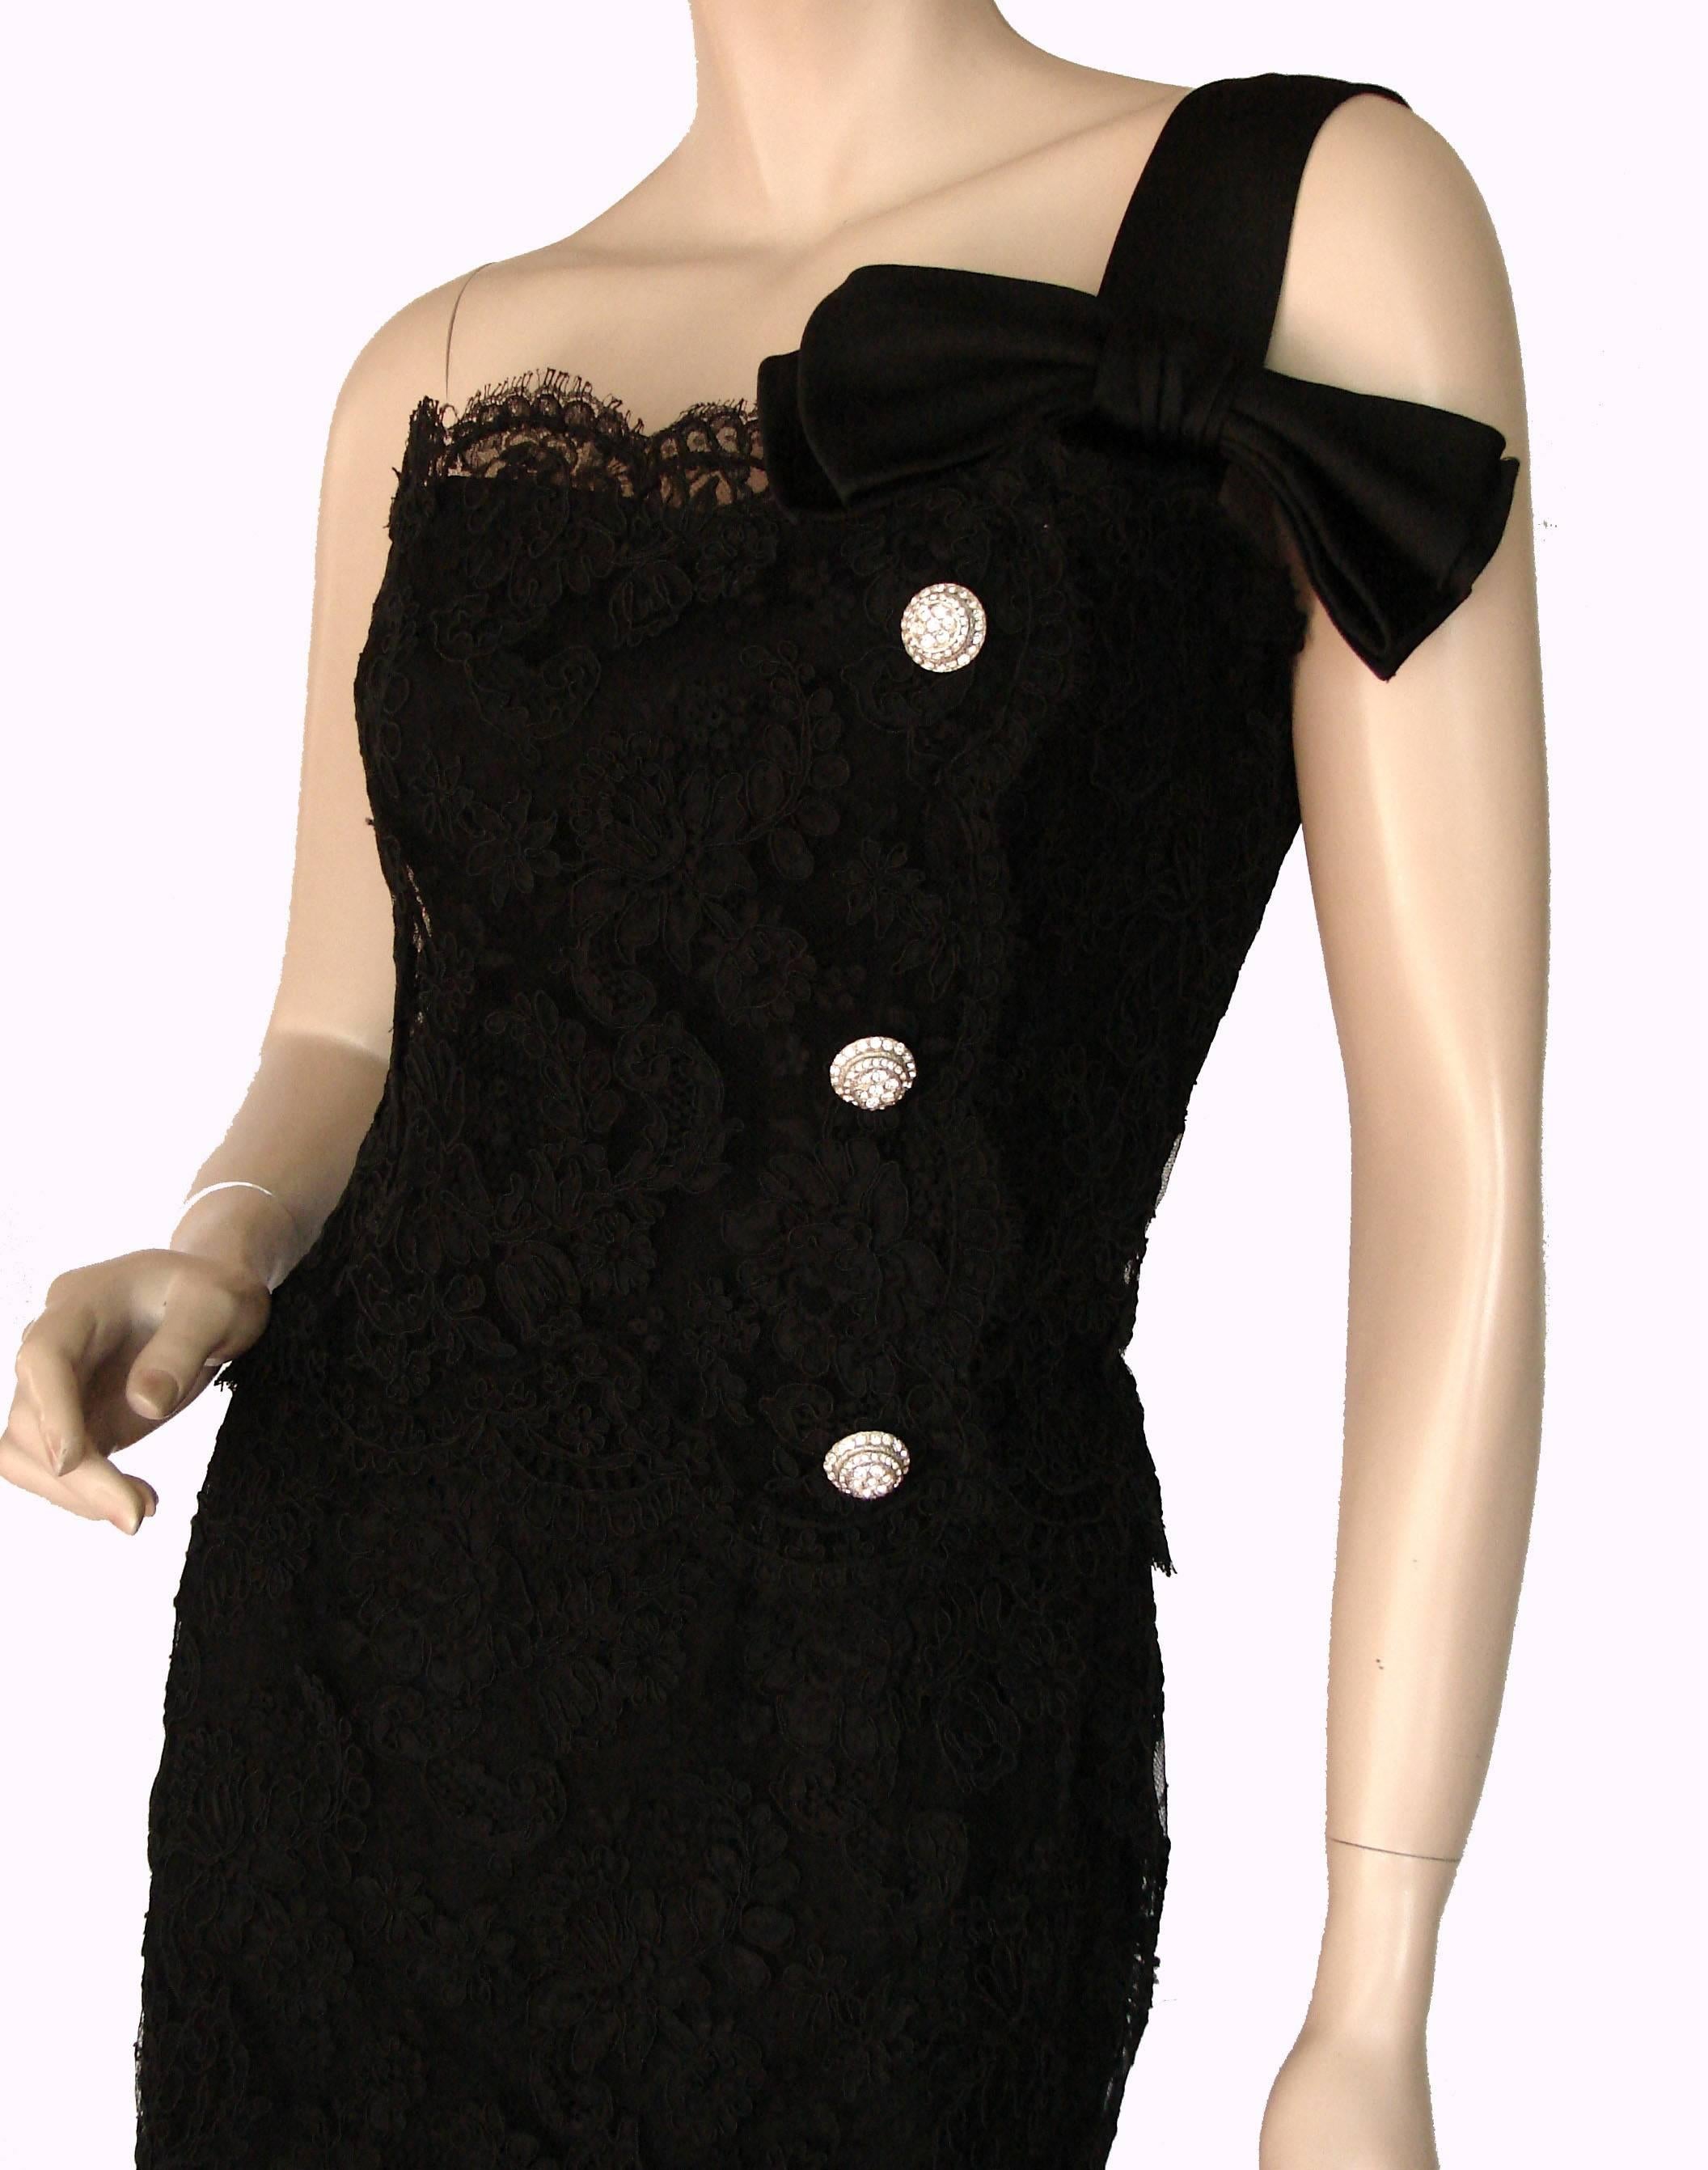 This black lace cocktail dress was made in the 1960s by Harvey Berin, known for his copies of Parisian designs and a favorite of Pat Nixon and other First Ladies.  Sheath-style with a wiggle skirt and fully-lined in black satin, this fabulous lace